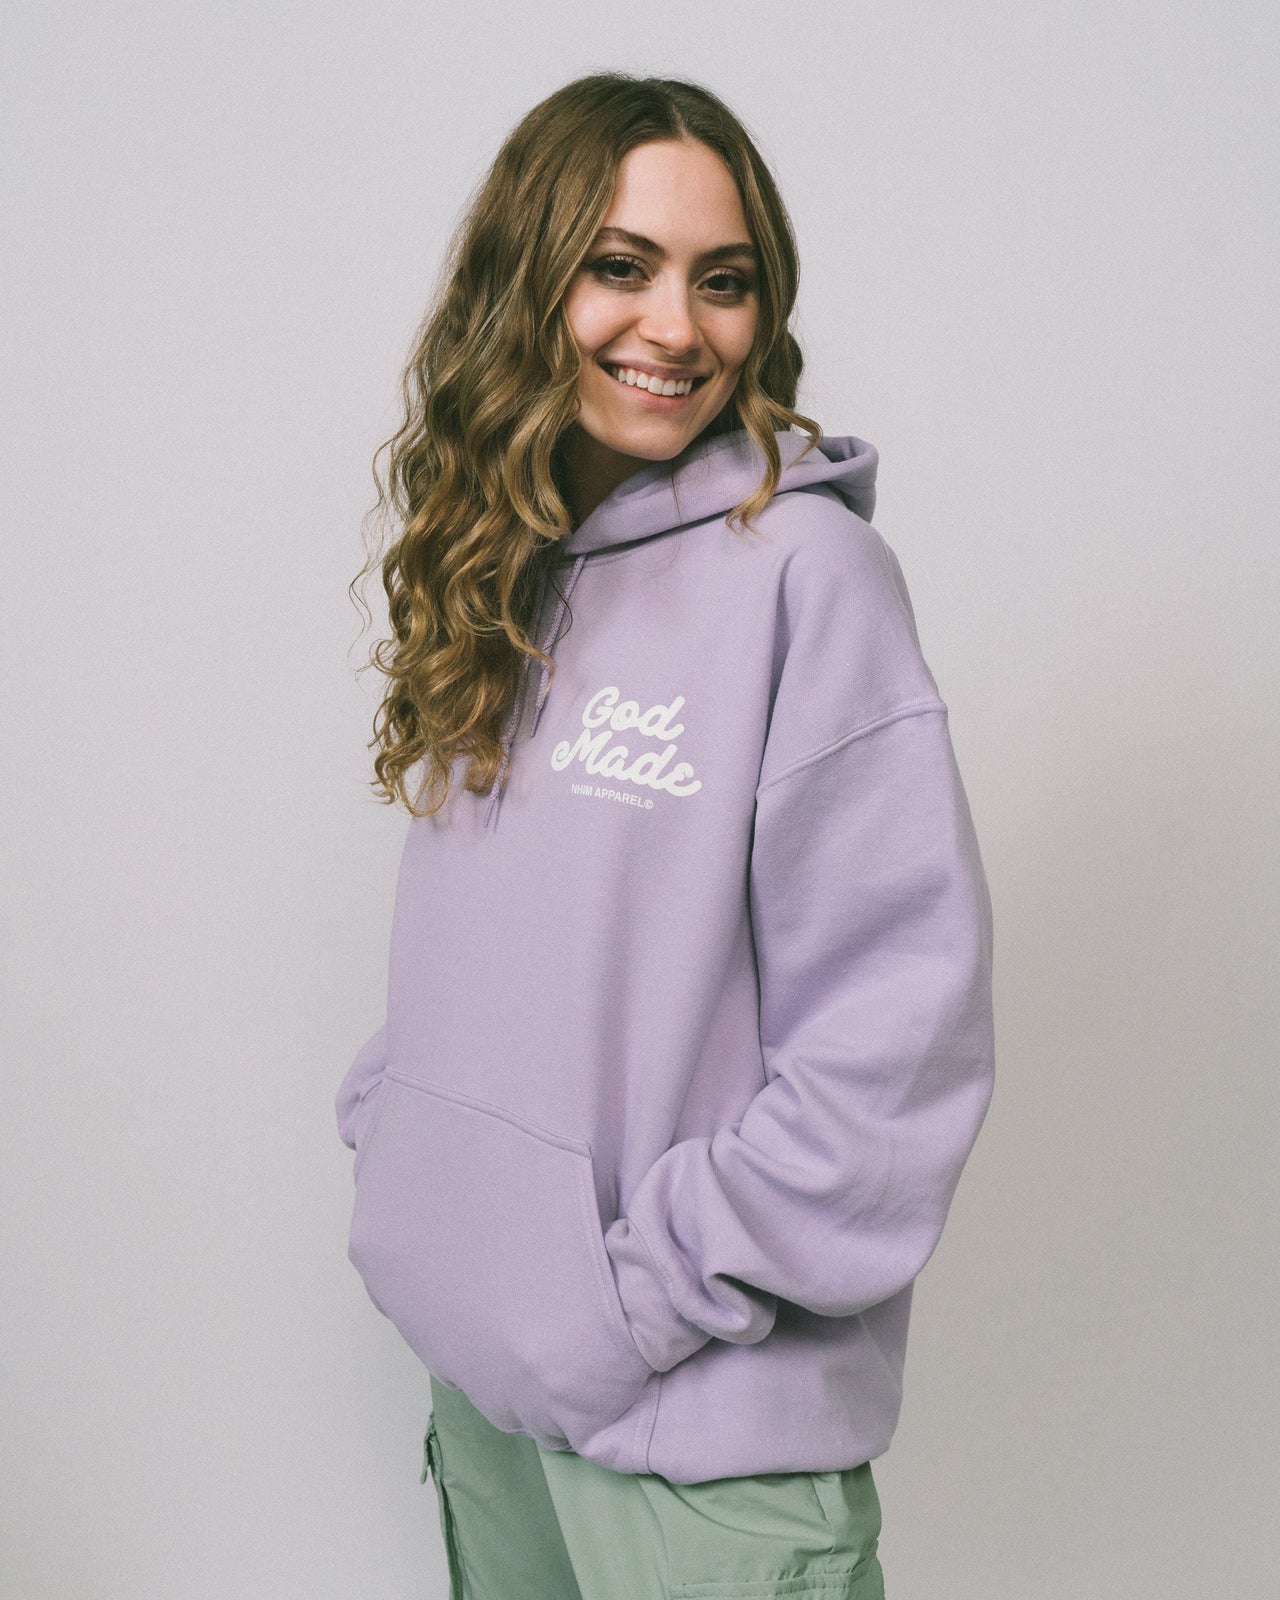 God Made lavender colored hooded sweatshirt with white graphic made by NHIM APPAREL christian clothing brand